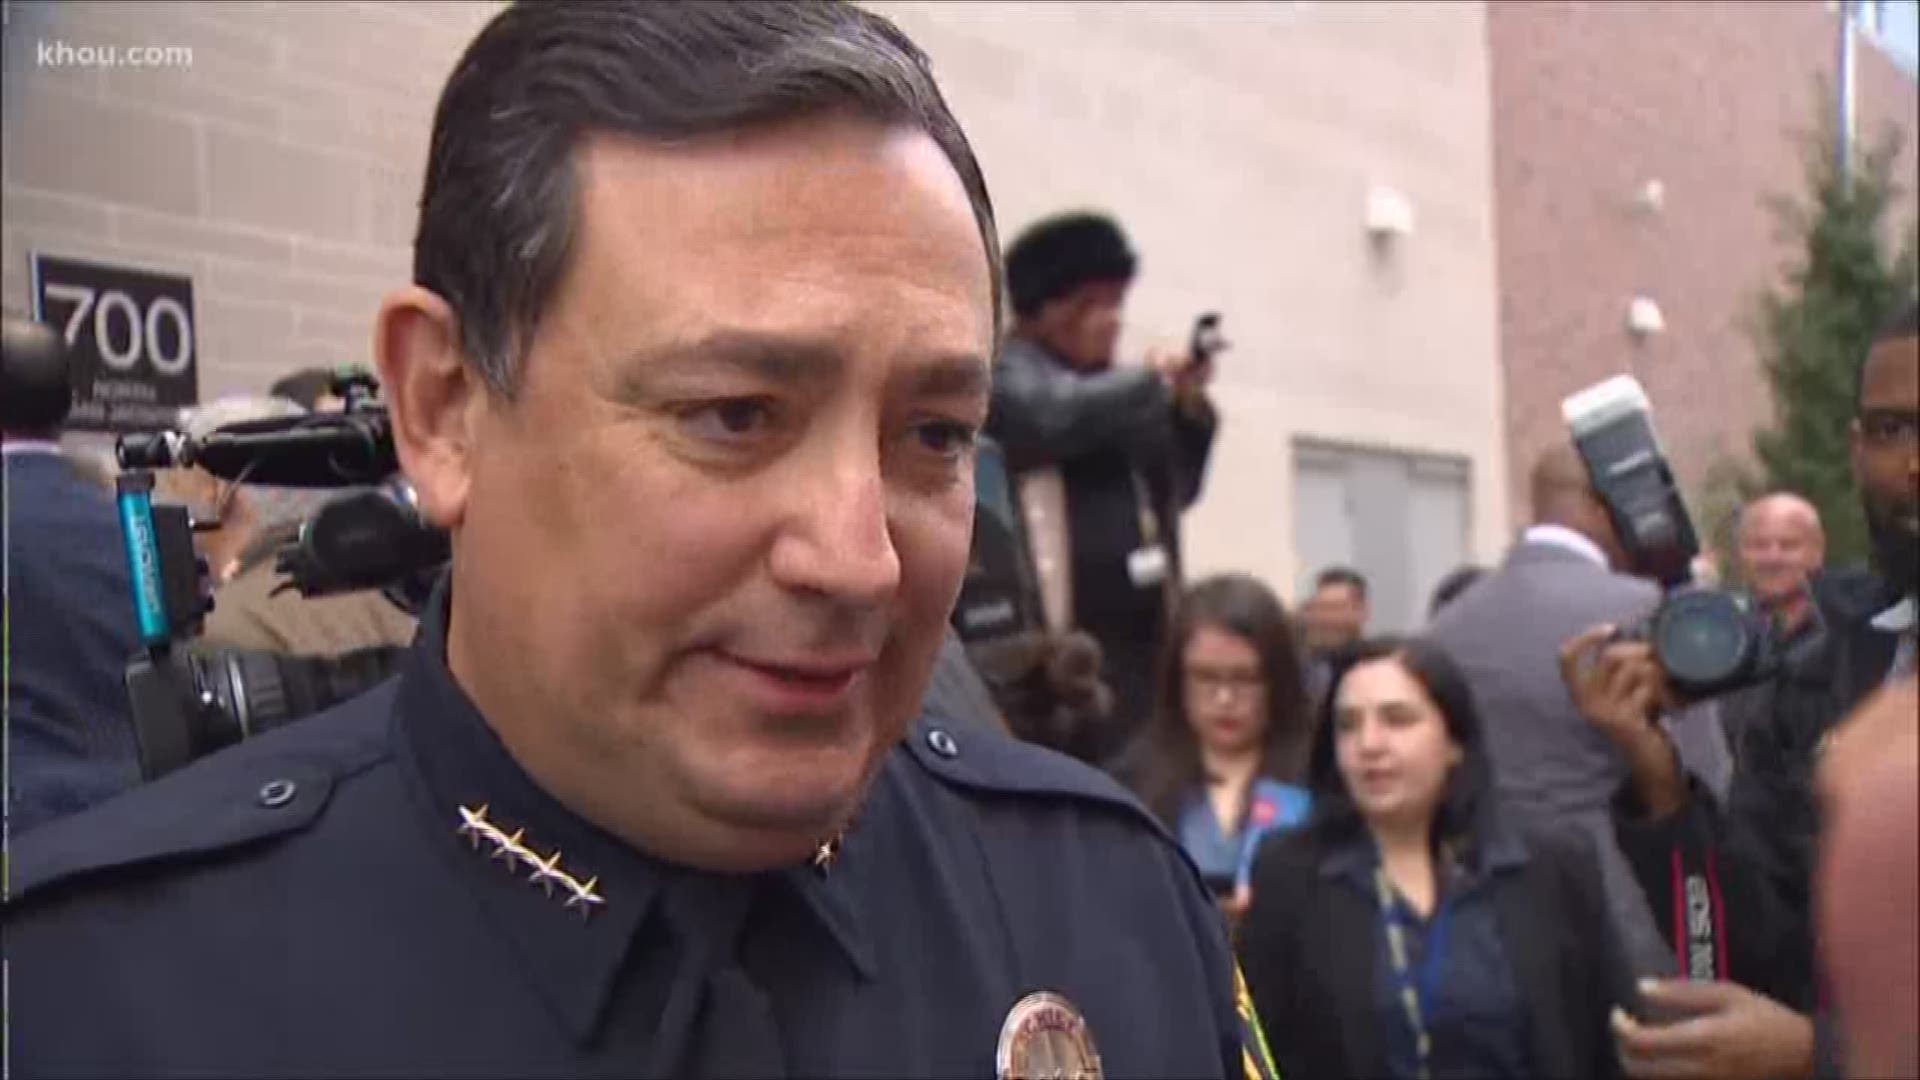 The investigation continues into Monday’s raid and shootout that left five Houston police officers injured and two suspects dead. Thursday, Chief Acevedo said the Houston Police Department is leaving “no stone unturned.” Acevedo said a comprehensive investigation is underway but shut down some of the rumors being spread on social media.